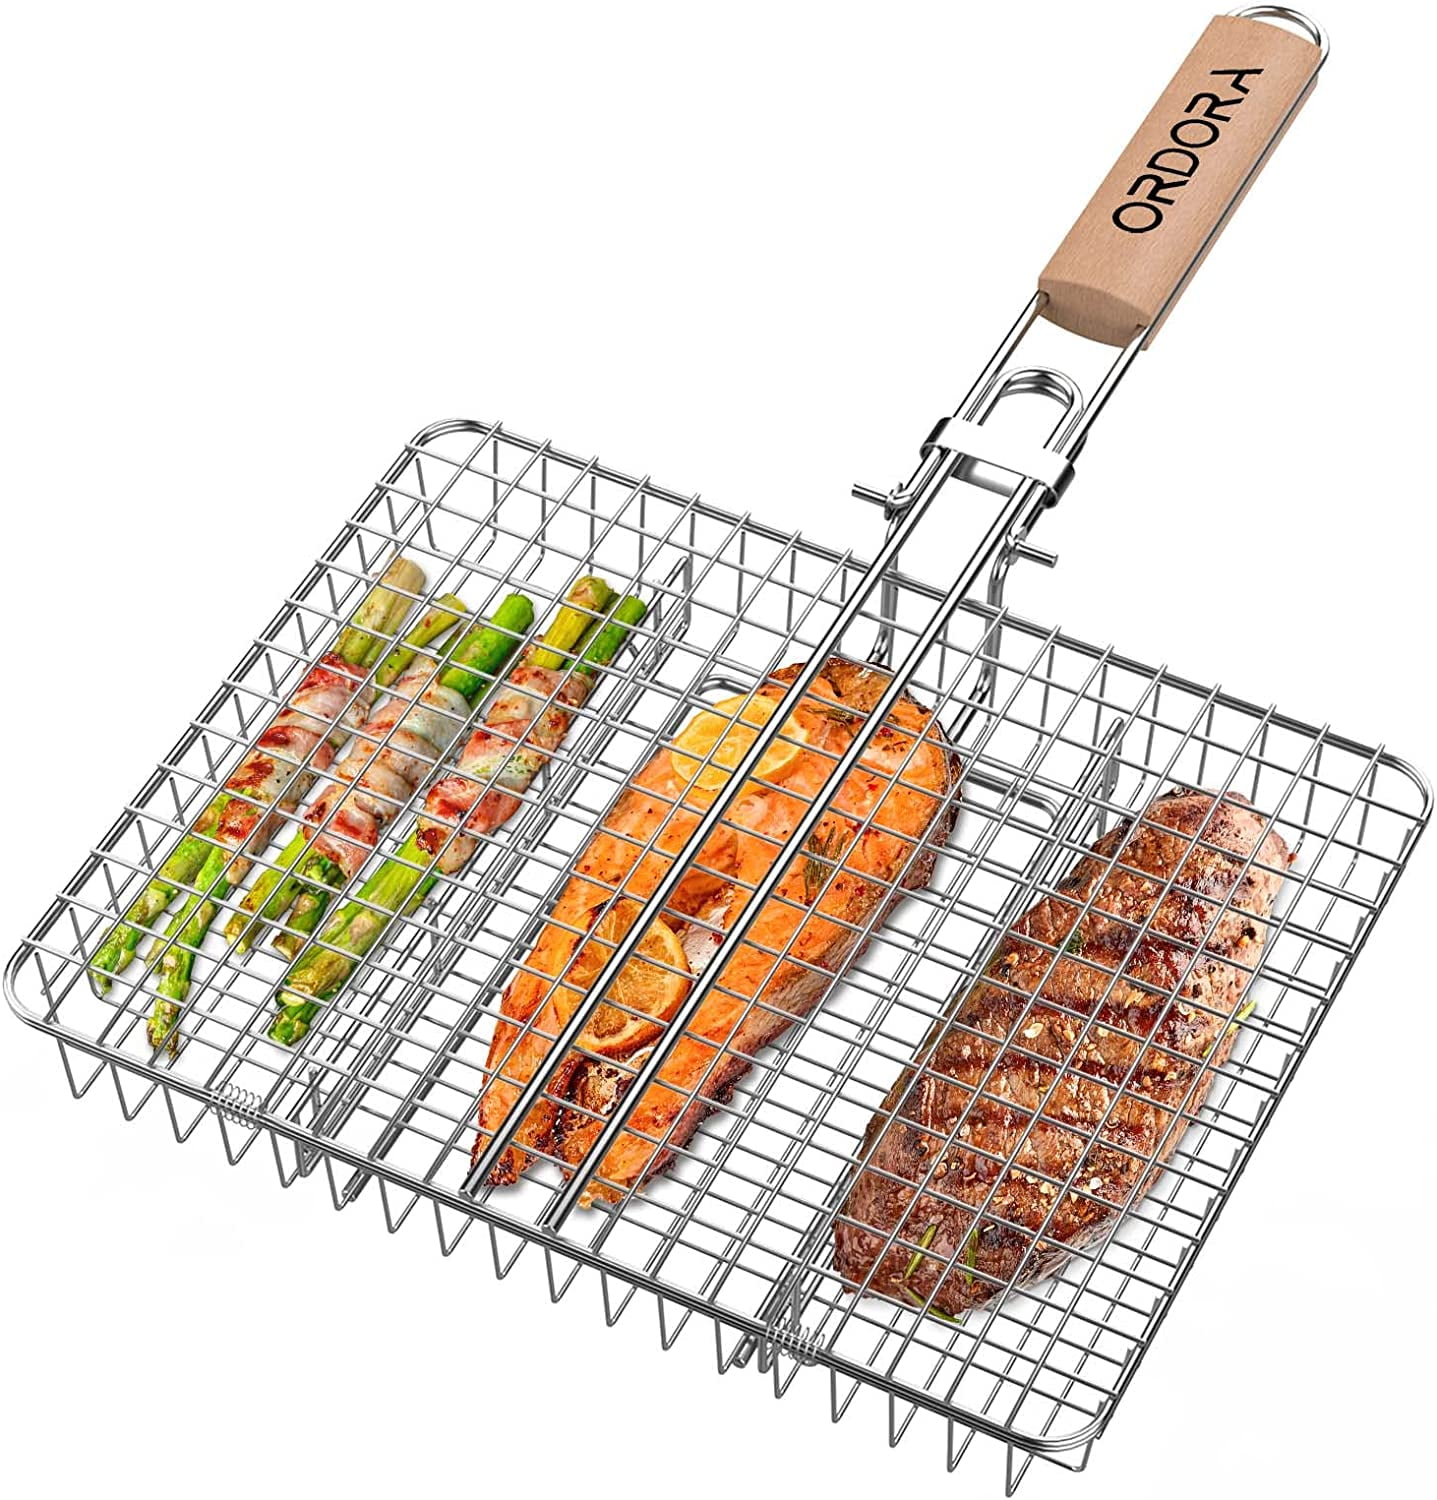 Midsumdr Outdoor Grill Fish Grilling Basket-Folding Portable Stainless  Steel BBQ Grill Basket for Fish Vegetables with Removable Handle BBQ